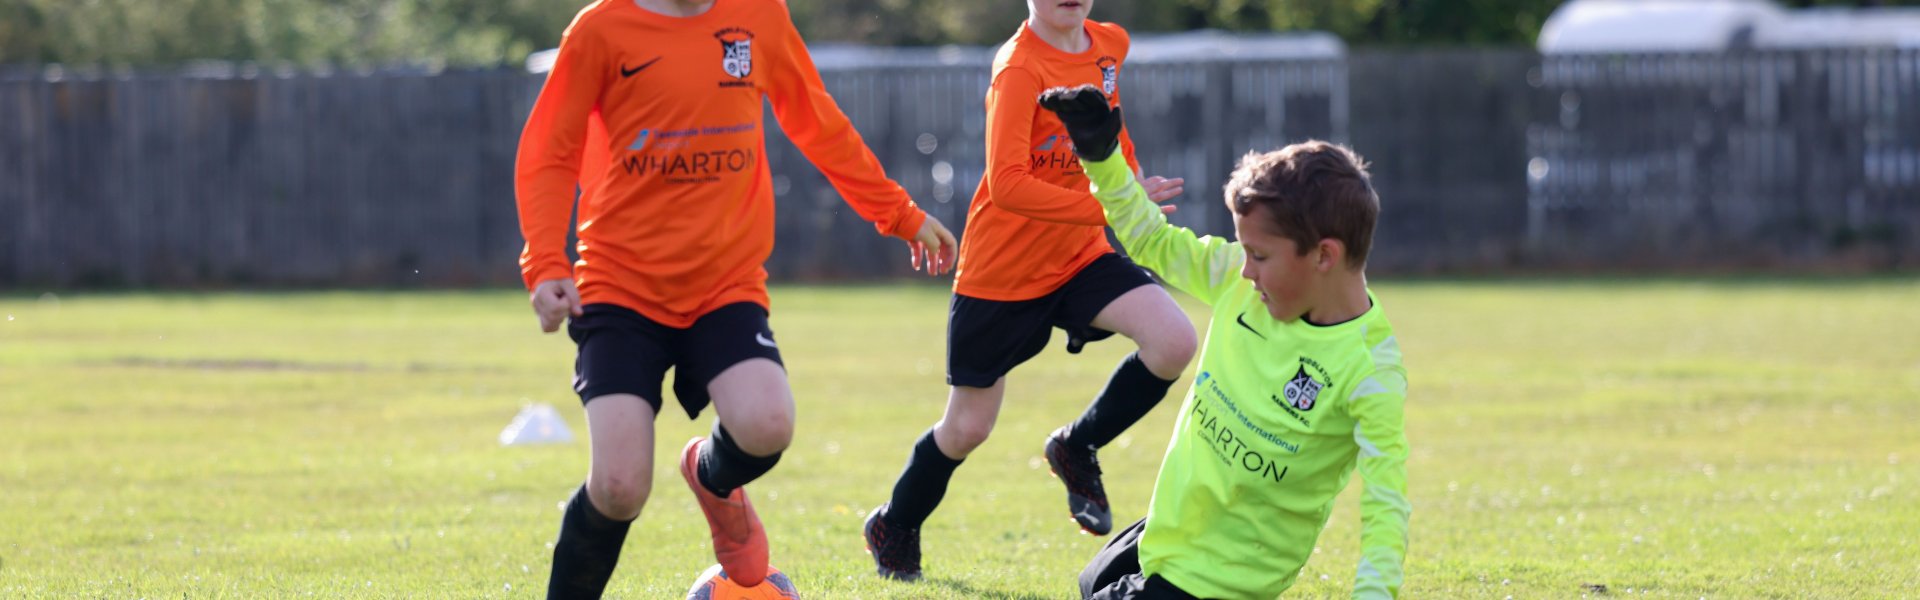 Youth Football Team Striker Deal for Sponsorship With Local